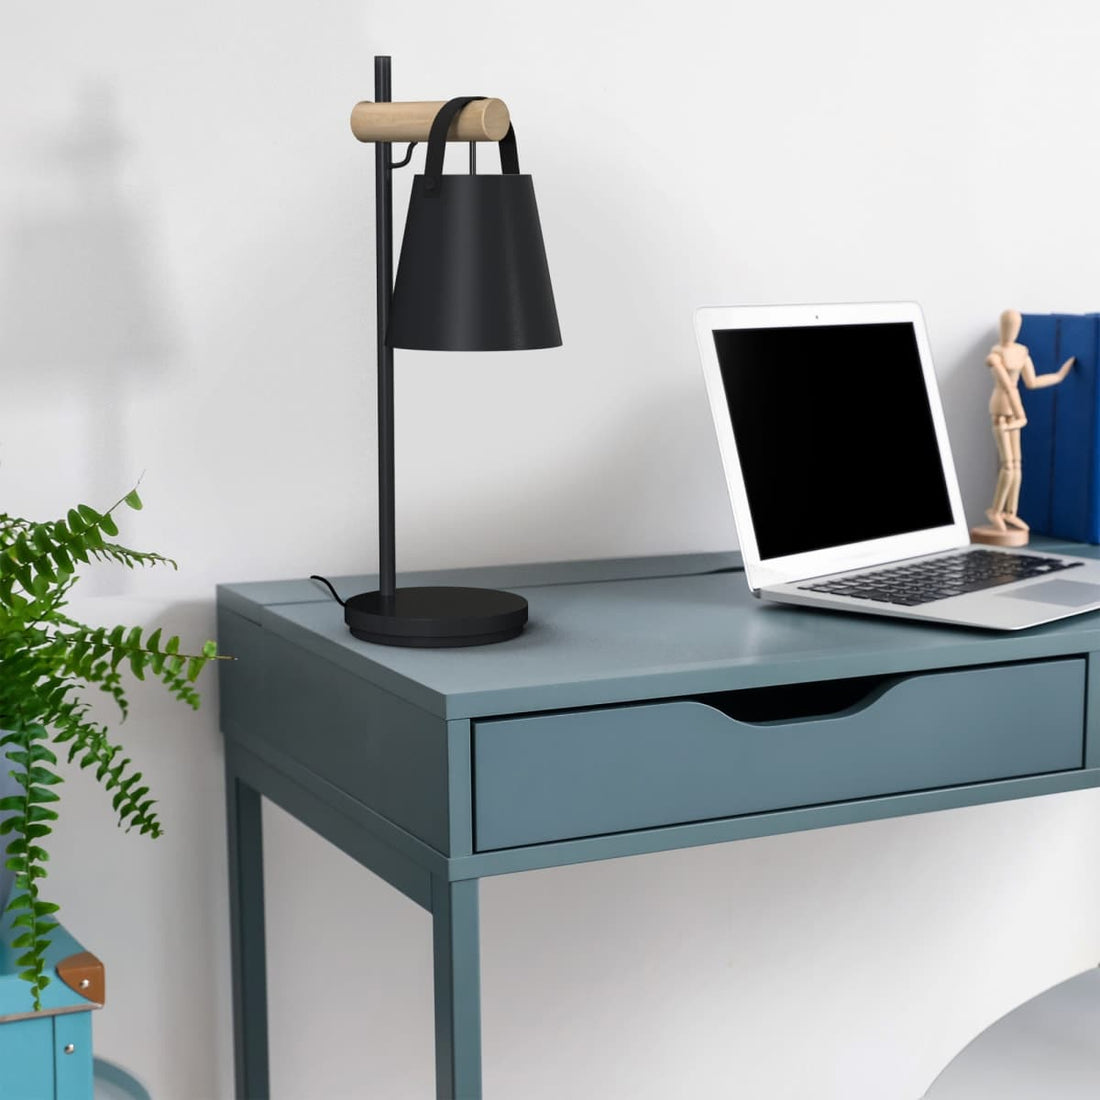 PANDORE TABLE LAMP WOOD AND METAL BLACK 25X56 CM E27 - best price from Maltashopper.com BR420007569